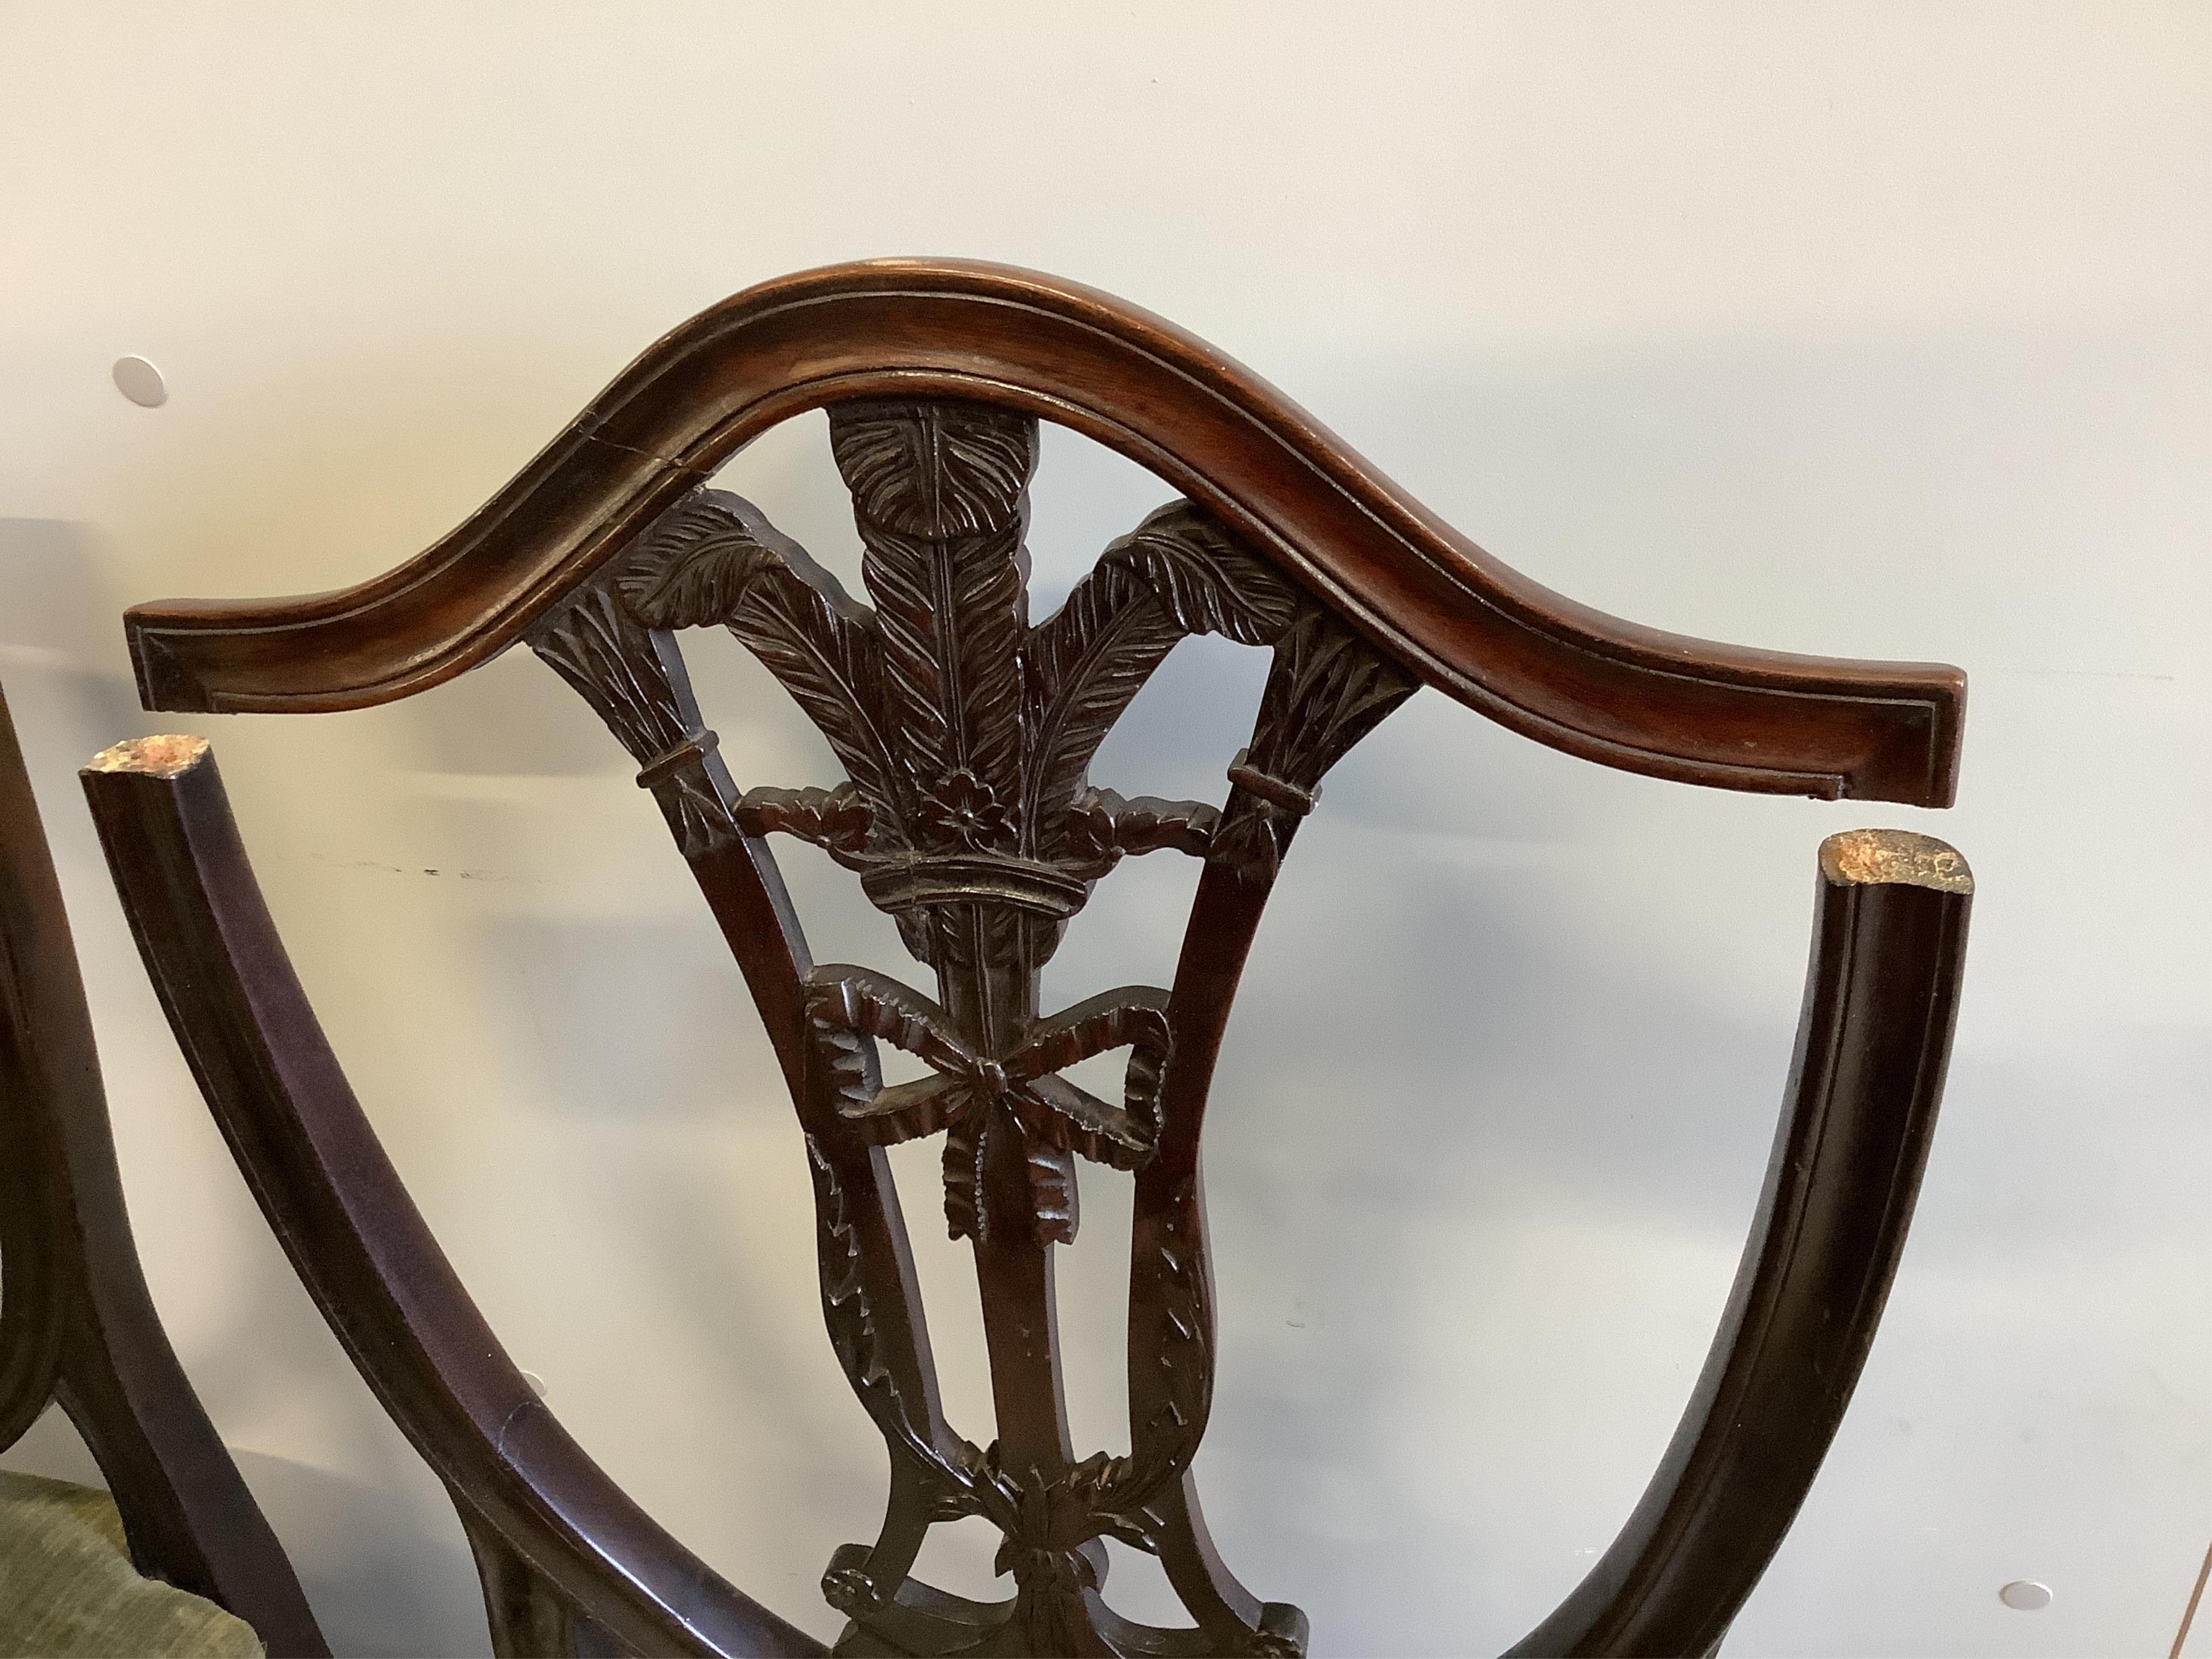 Two Hepplewhite period mahogany dining chairs, a 19th century Sheraton design elbow chair, a pair of - Image 2 of 3